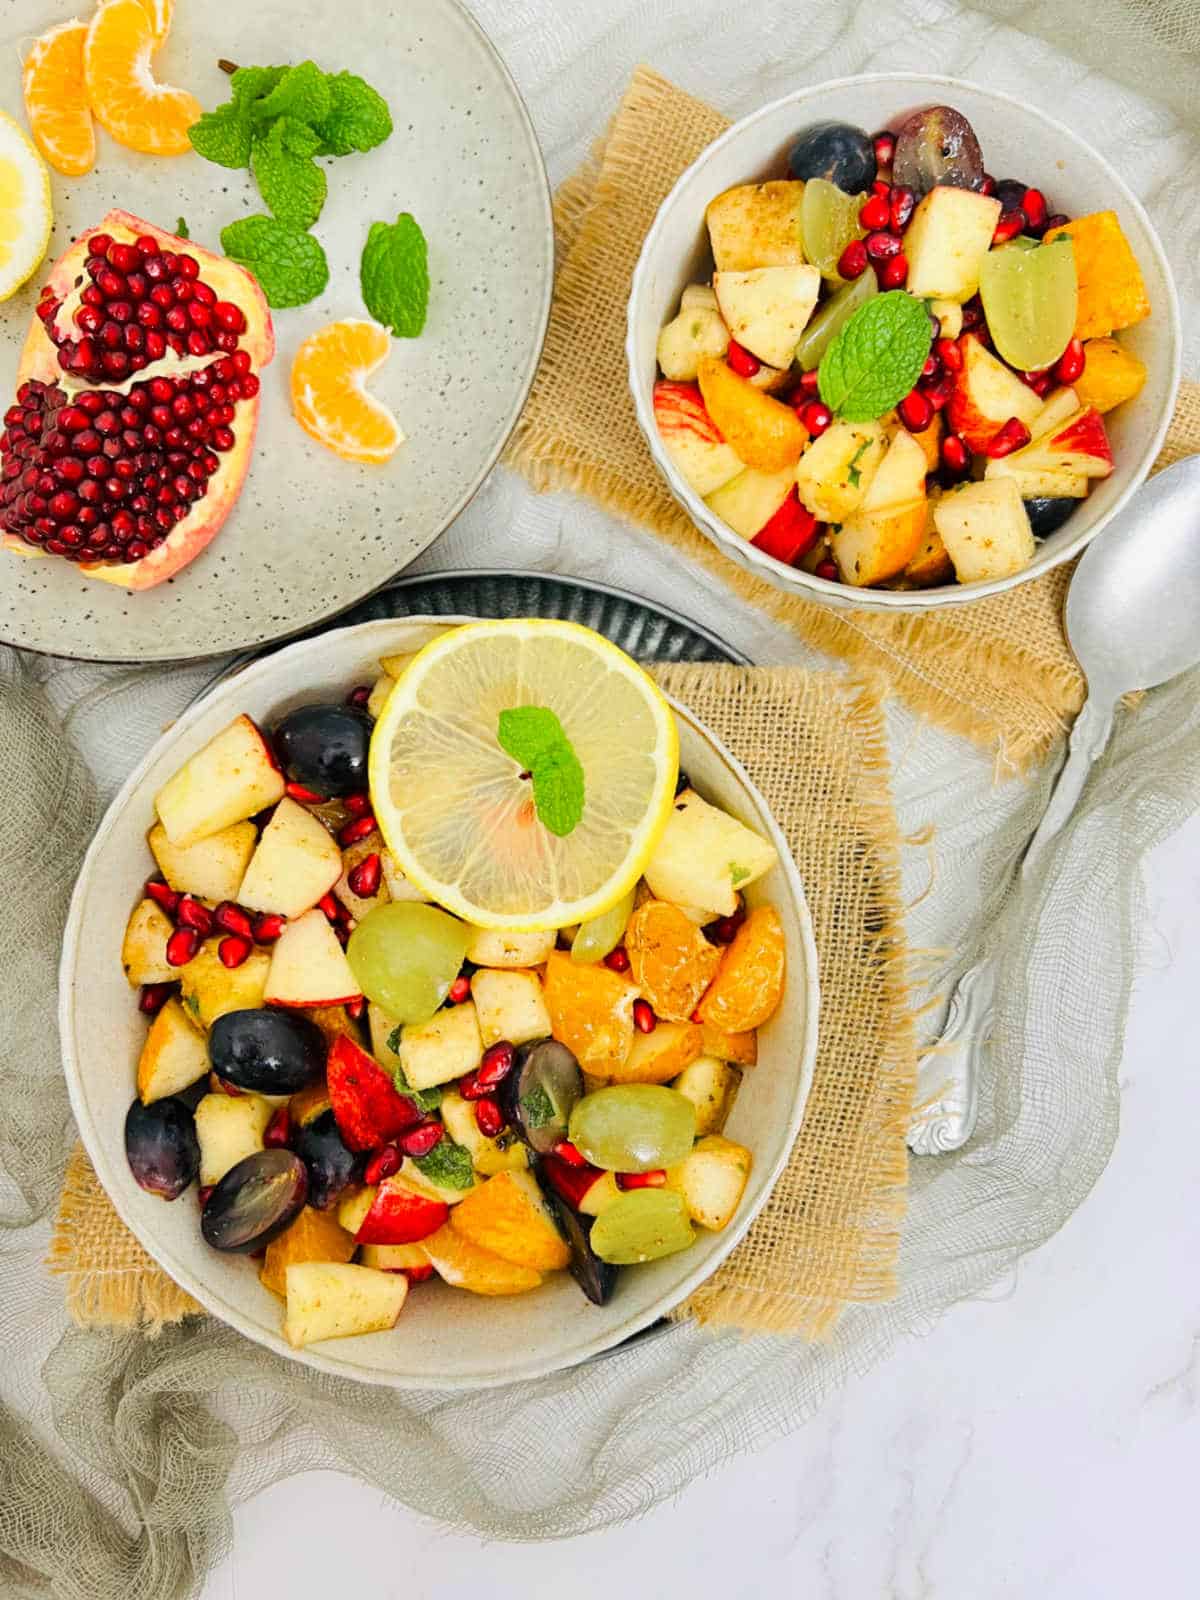 Fruit chaat served on a plate with fruits in the background.